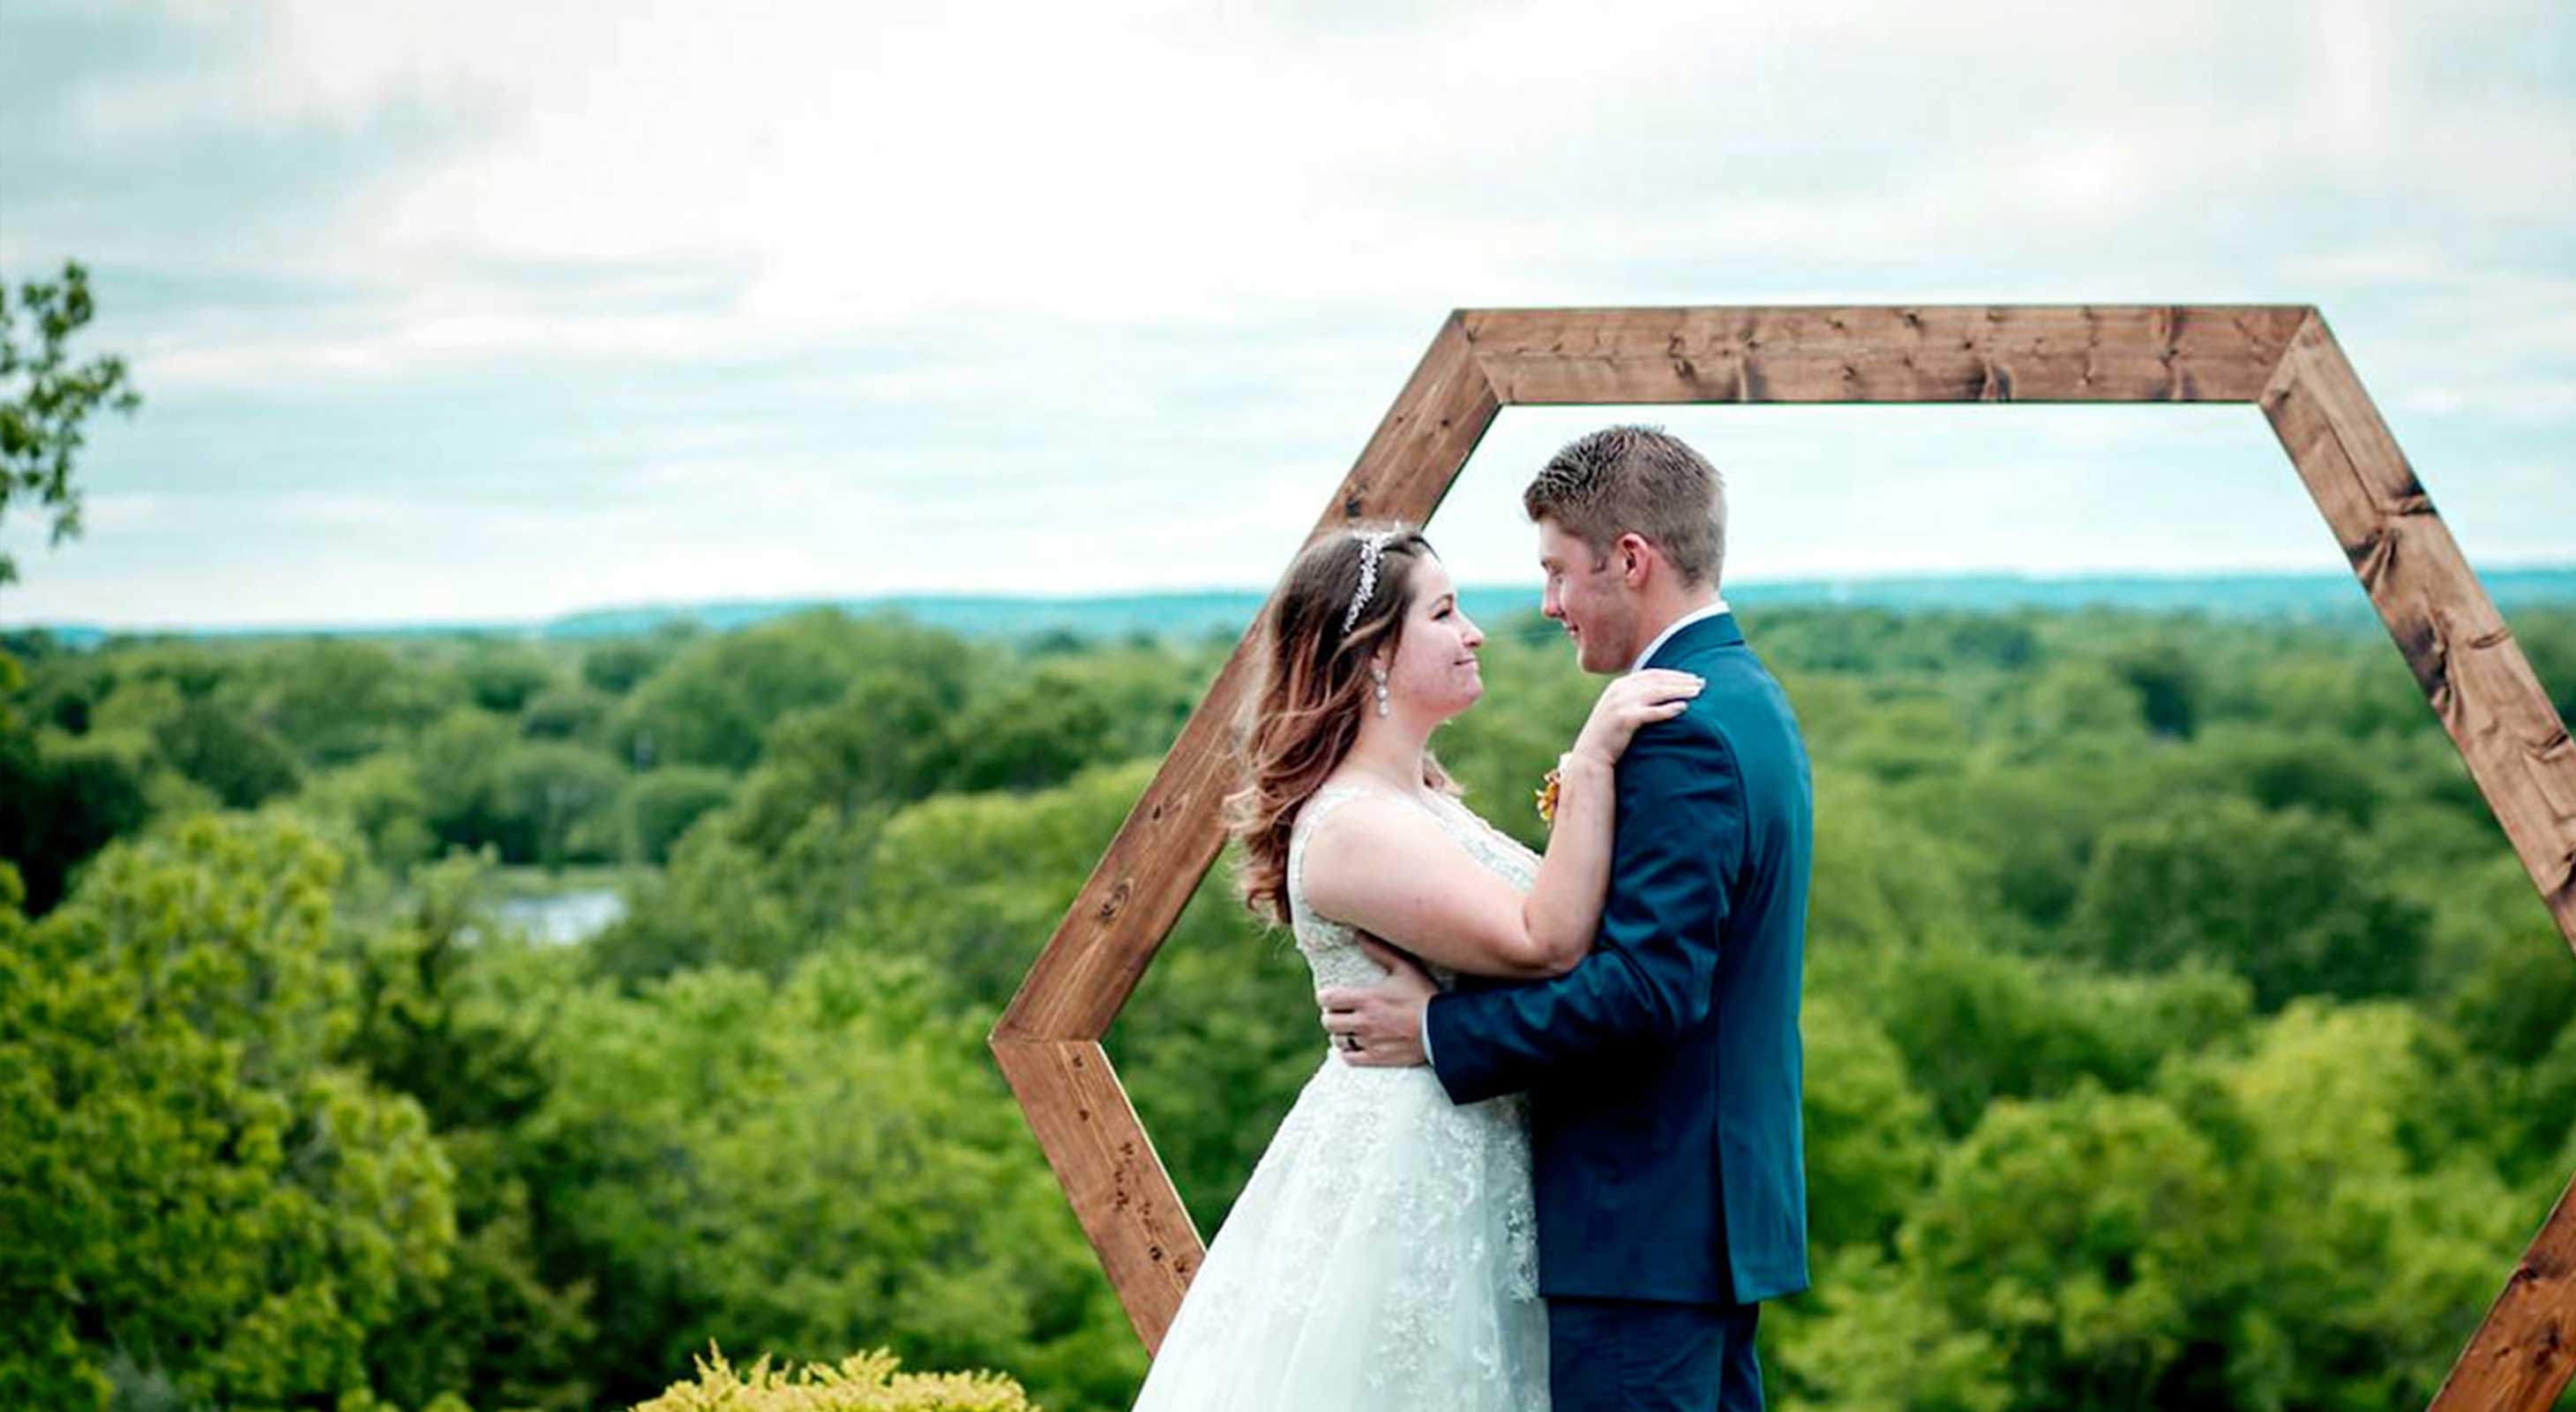 Bride and groom in front of a wooden arch and beautiful views at Kansas wedding venue